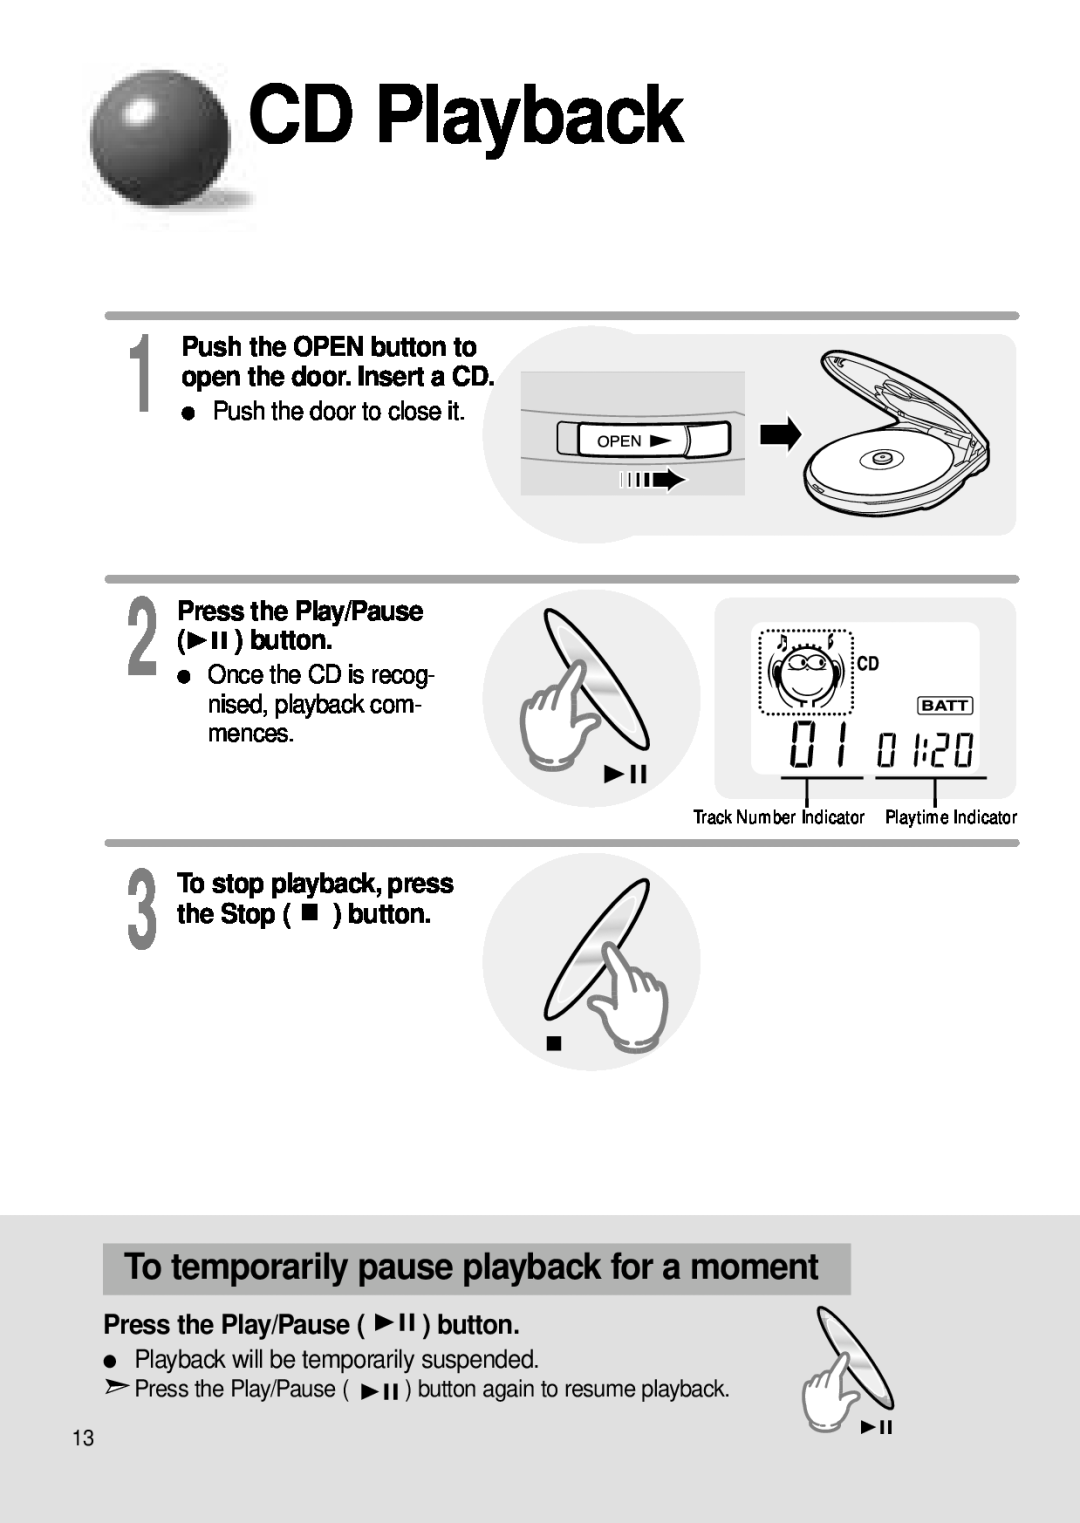 Samsung MCD-MP67 instruction manual CD Playback, To temporarily pause playback for a moment, open the door. Insert a CD 